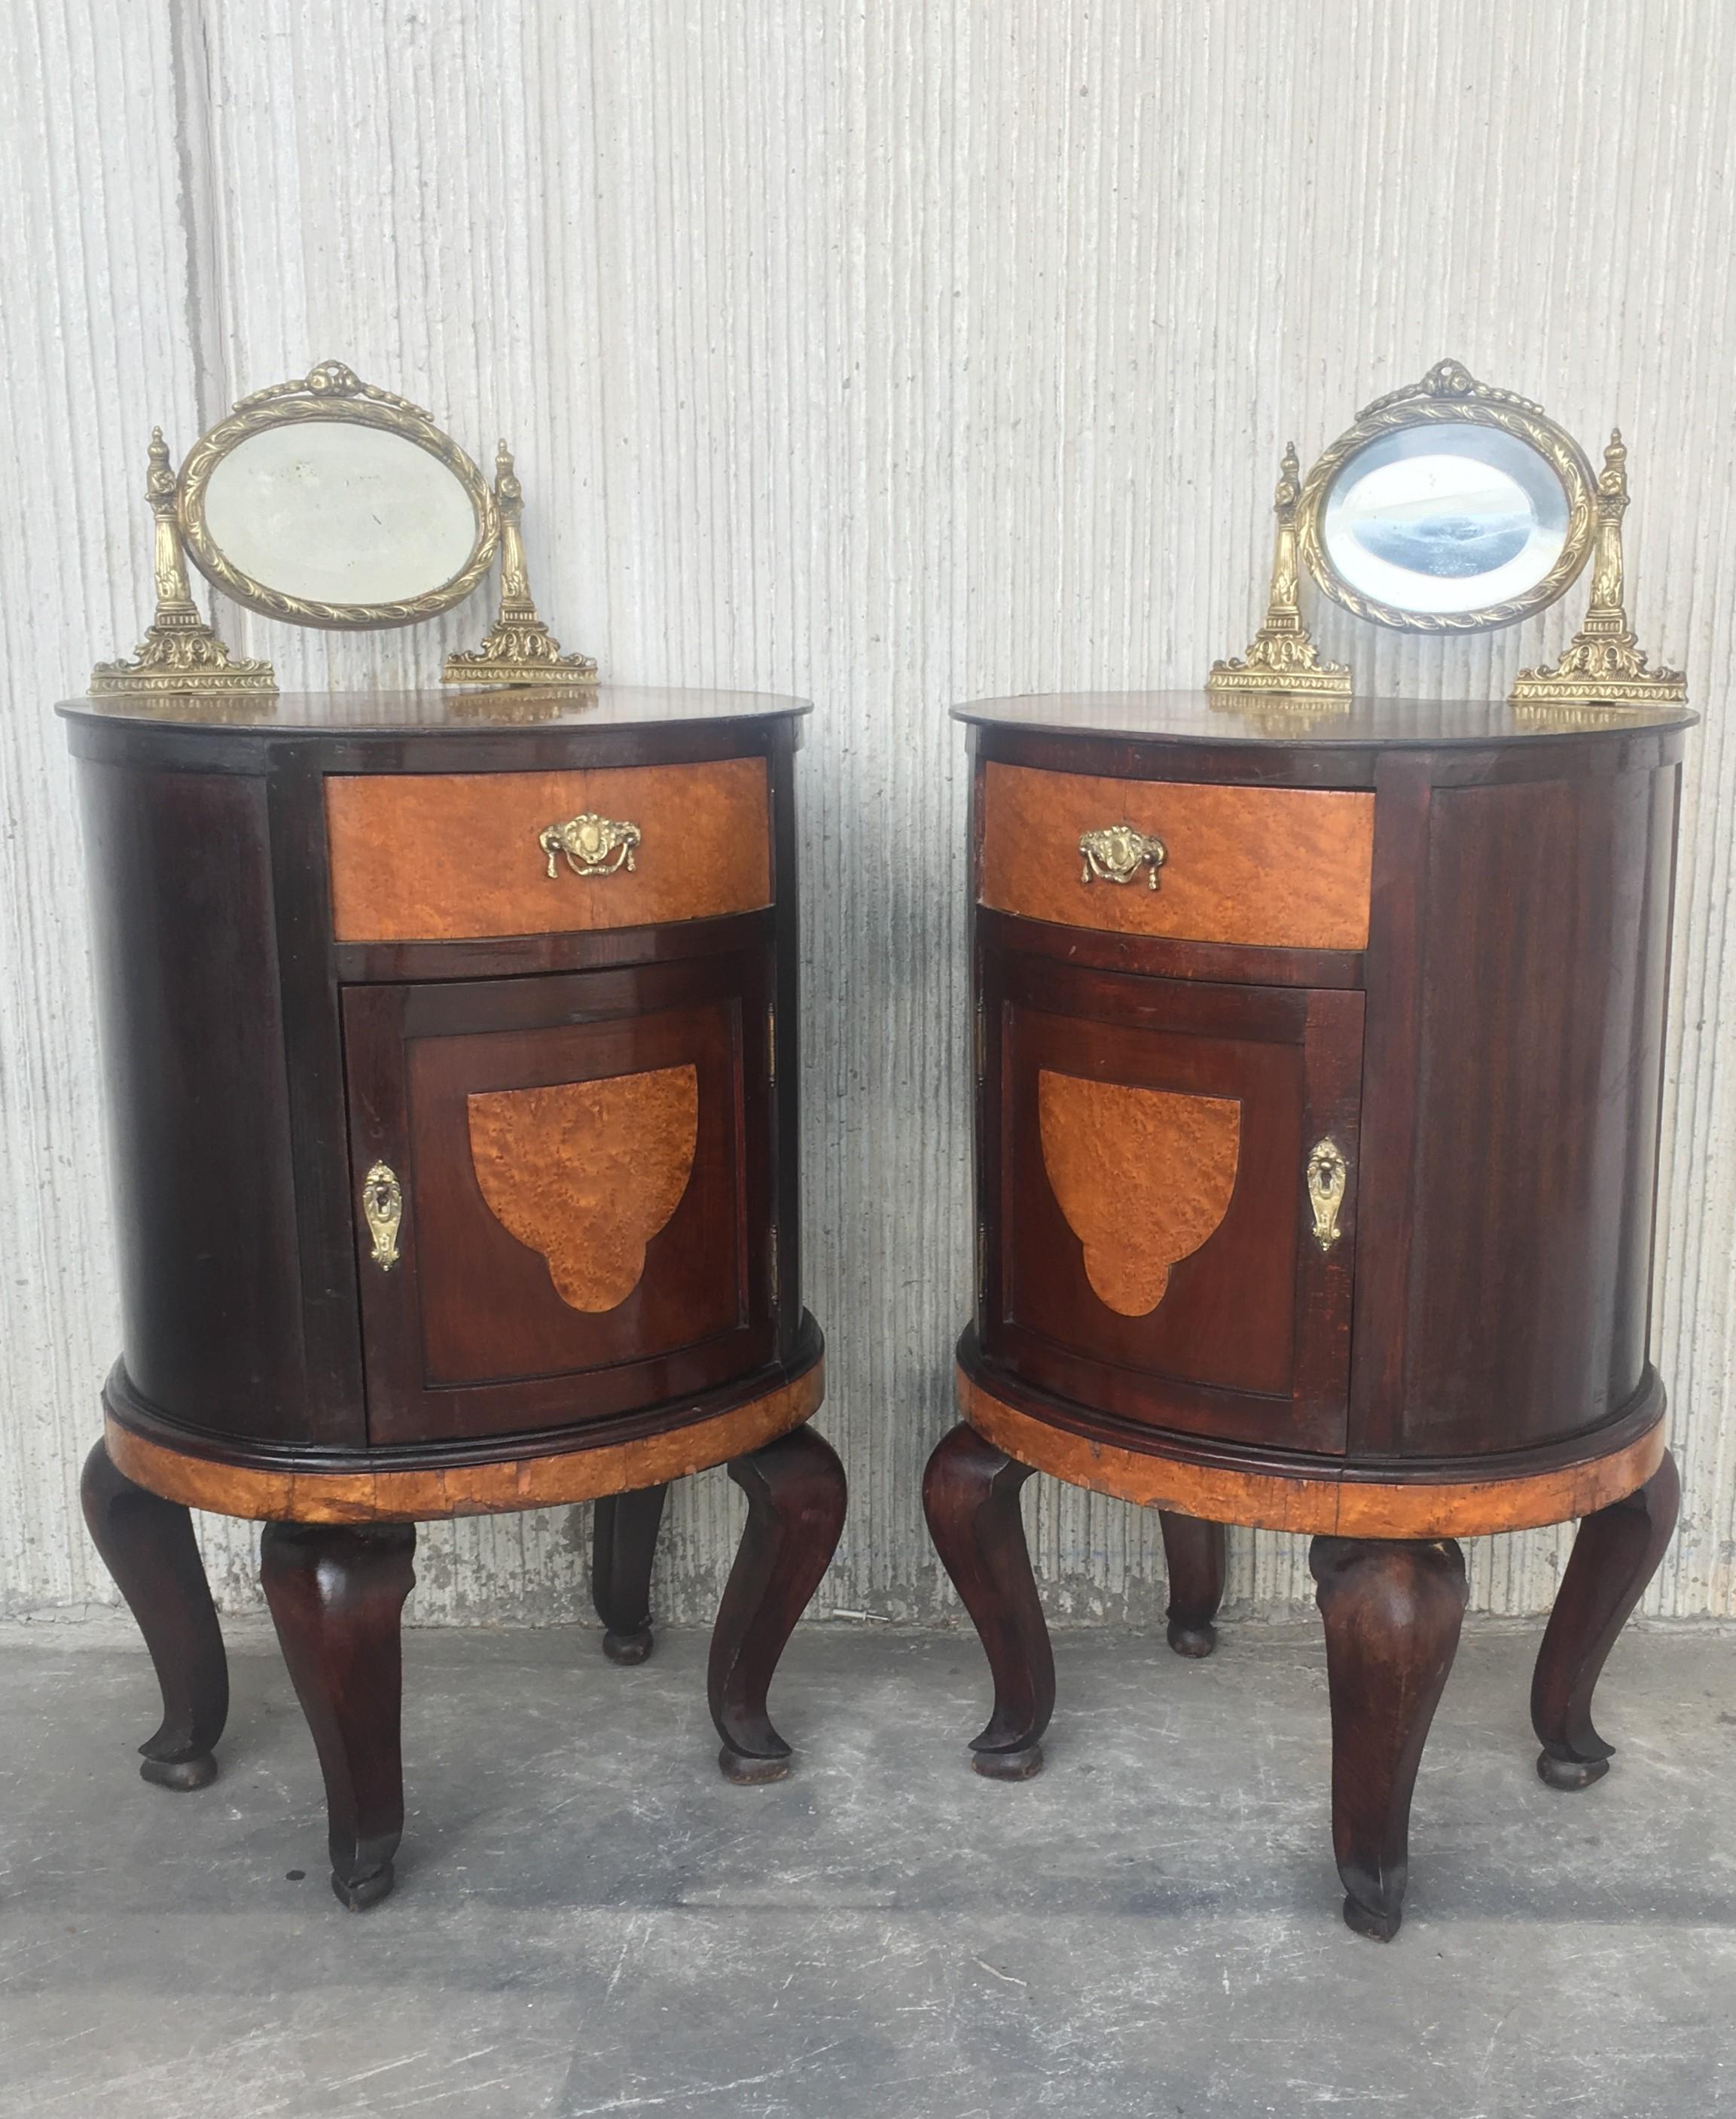 19th Century Art Deco Style Marquetry Nightstands with Metal and Mirror Crest, Pair